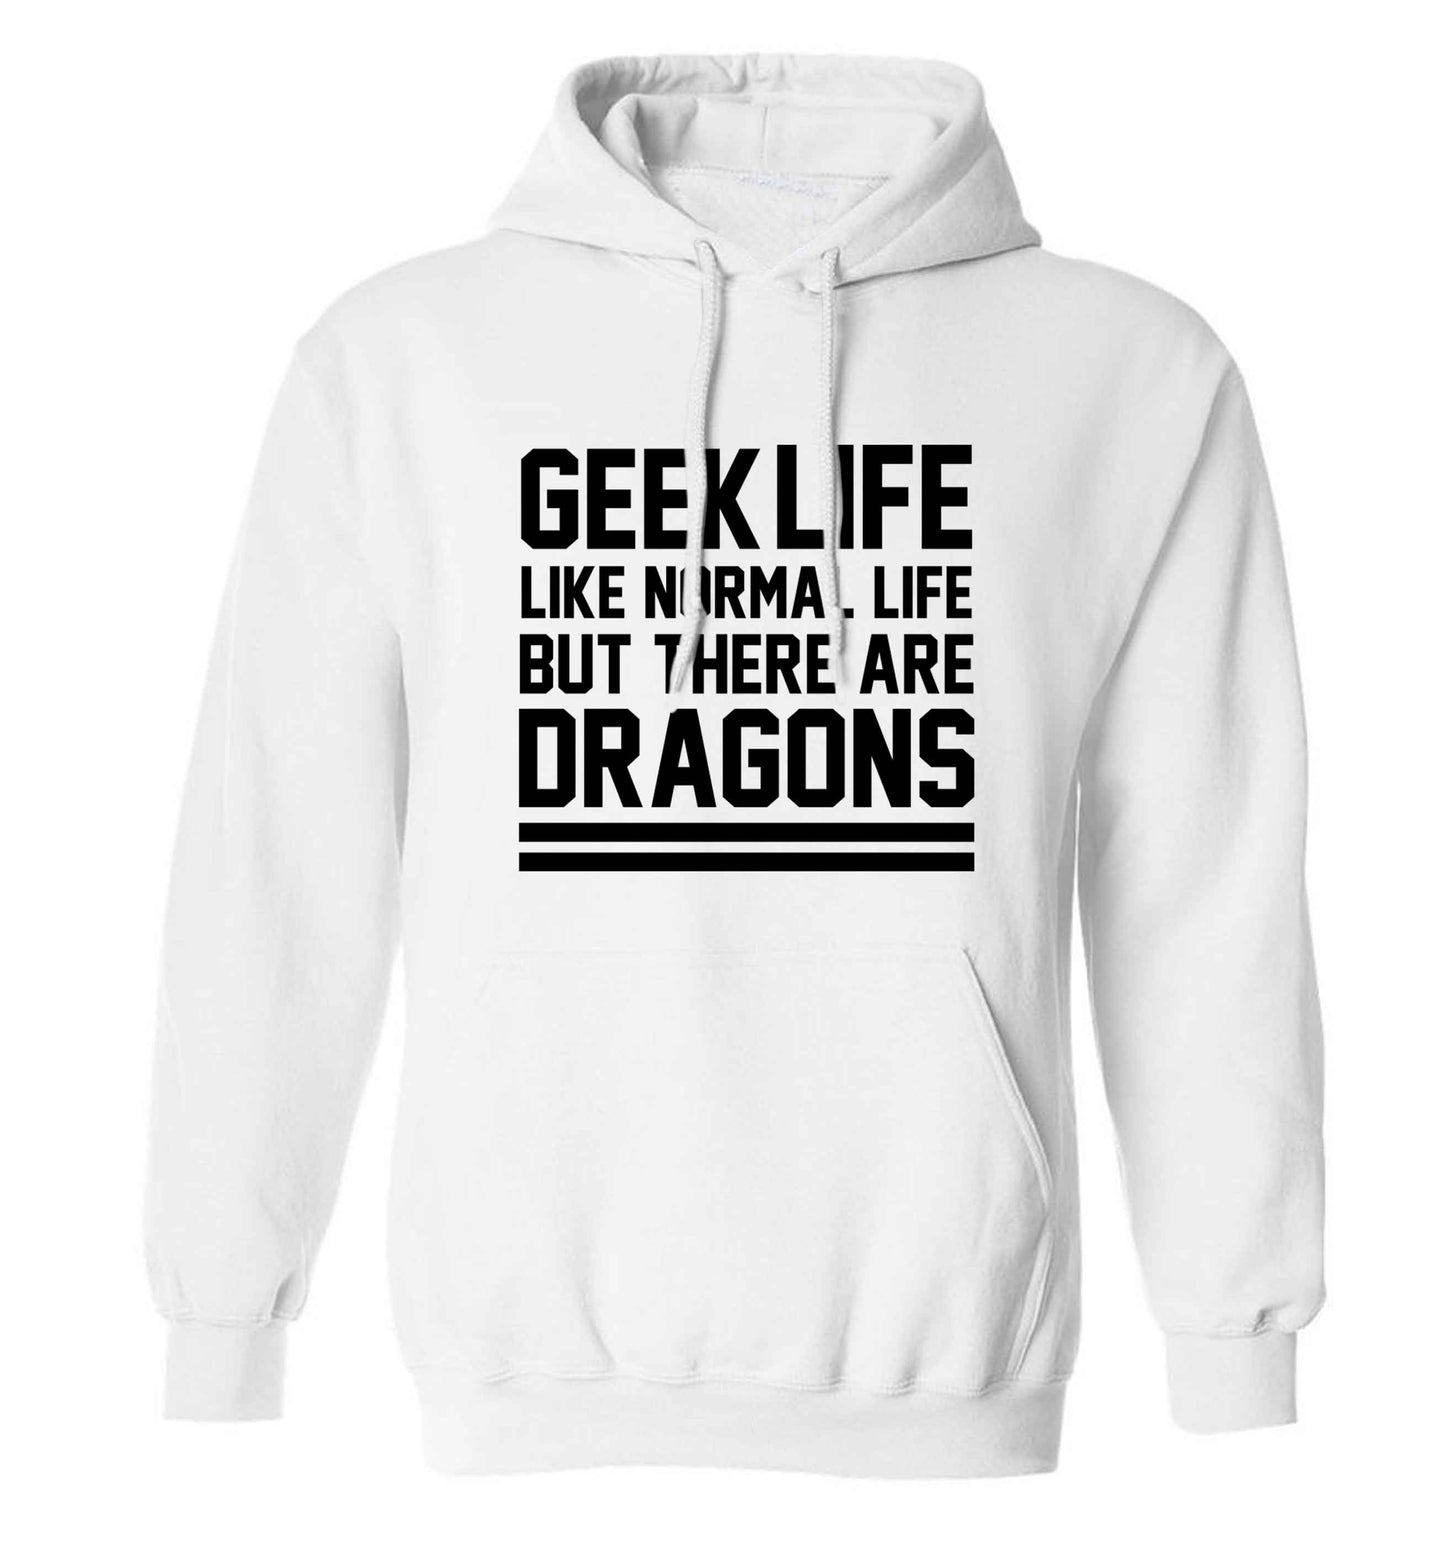 Geek life like normal life but there are dragons adults unisex white hoodie 2XL